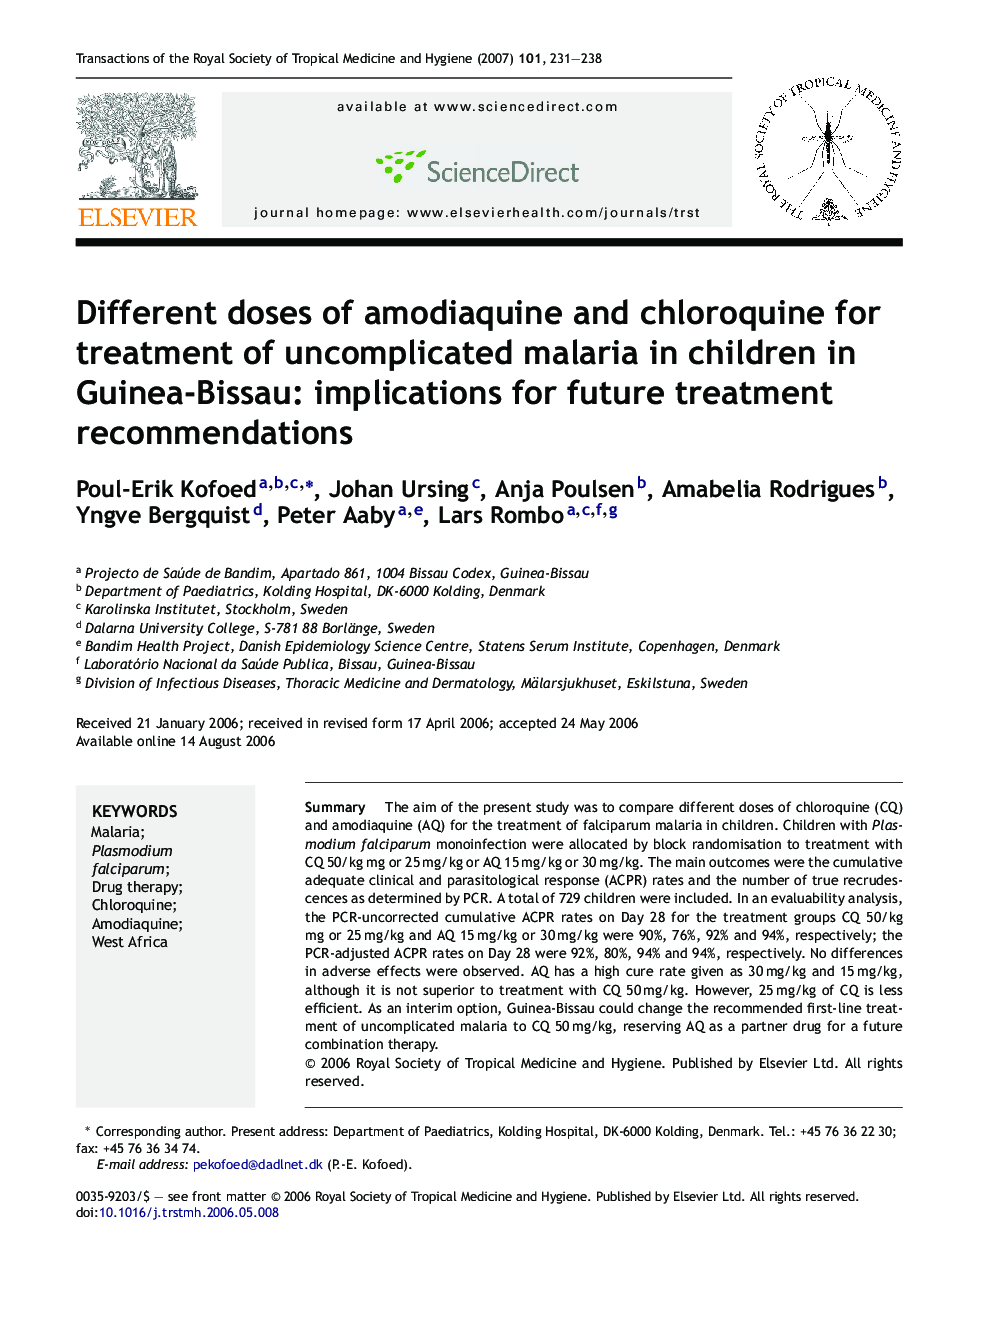 Different doses of amodiaquine and chloroquine for treatment of uncomplicated malaria in children in Guinea-Bissau: implications for future treatment recommendations